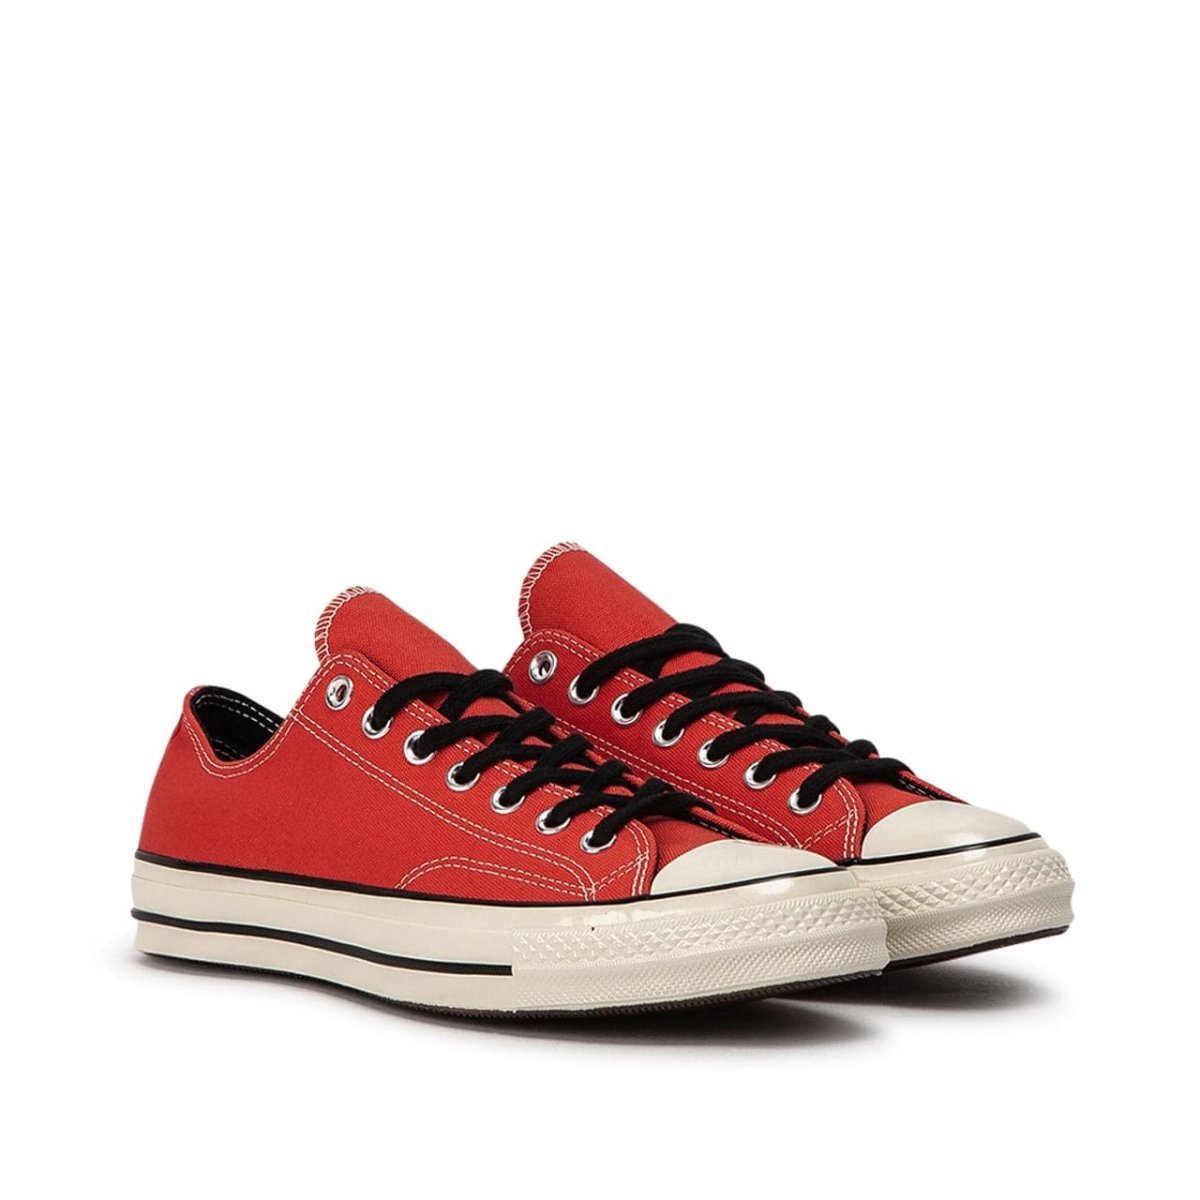 Converse Chuck Taylor 70 OX Low (Rot)  - Allike Store